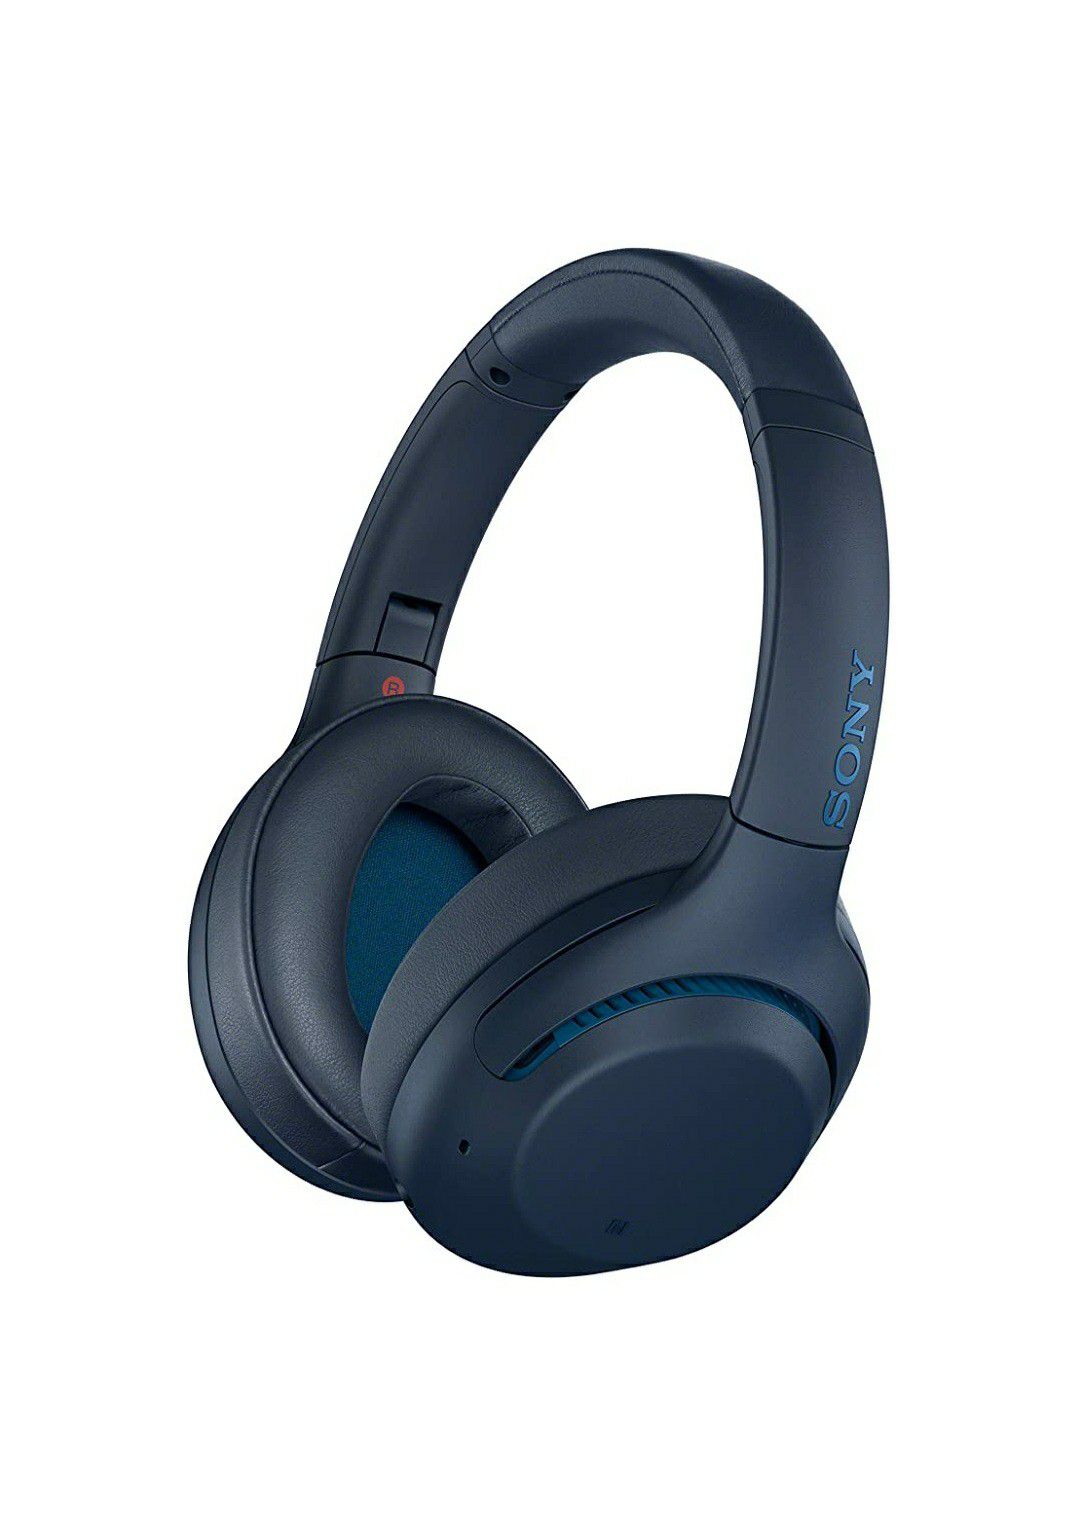 Sony WHXB900N Noise Cancelling Headphones, Wireless Bluetooth Over the Ear Headset - Blue